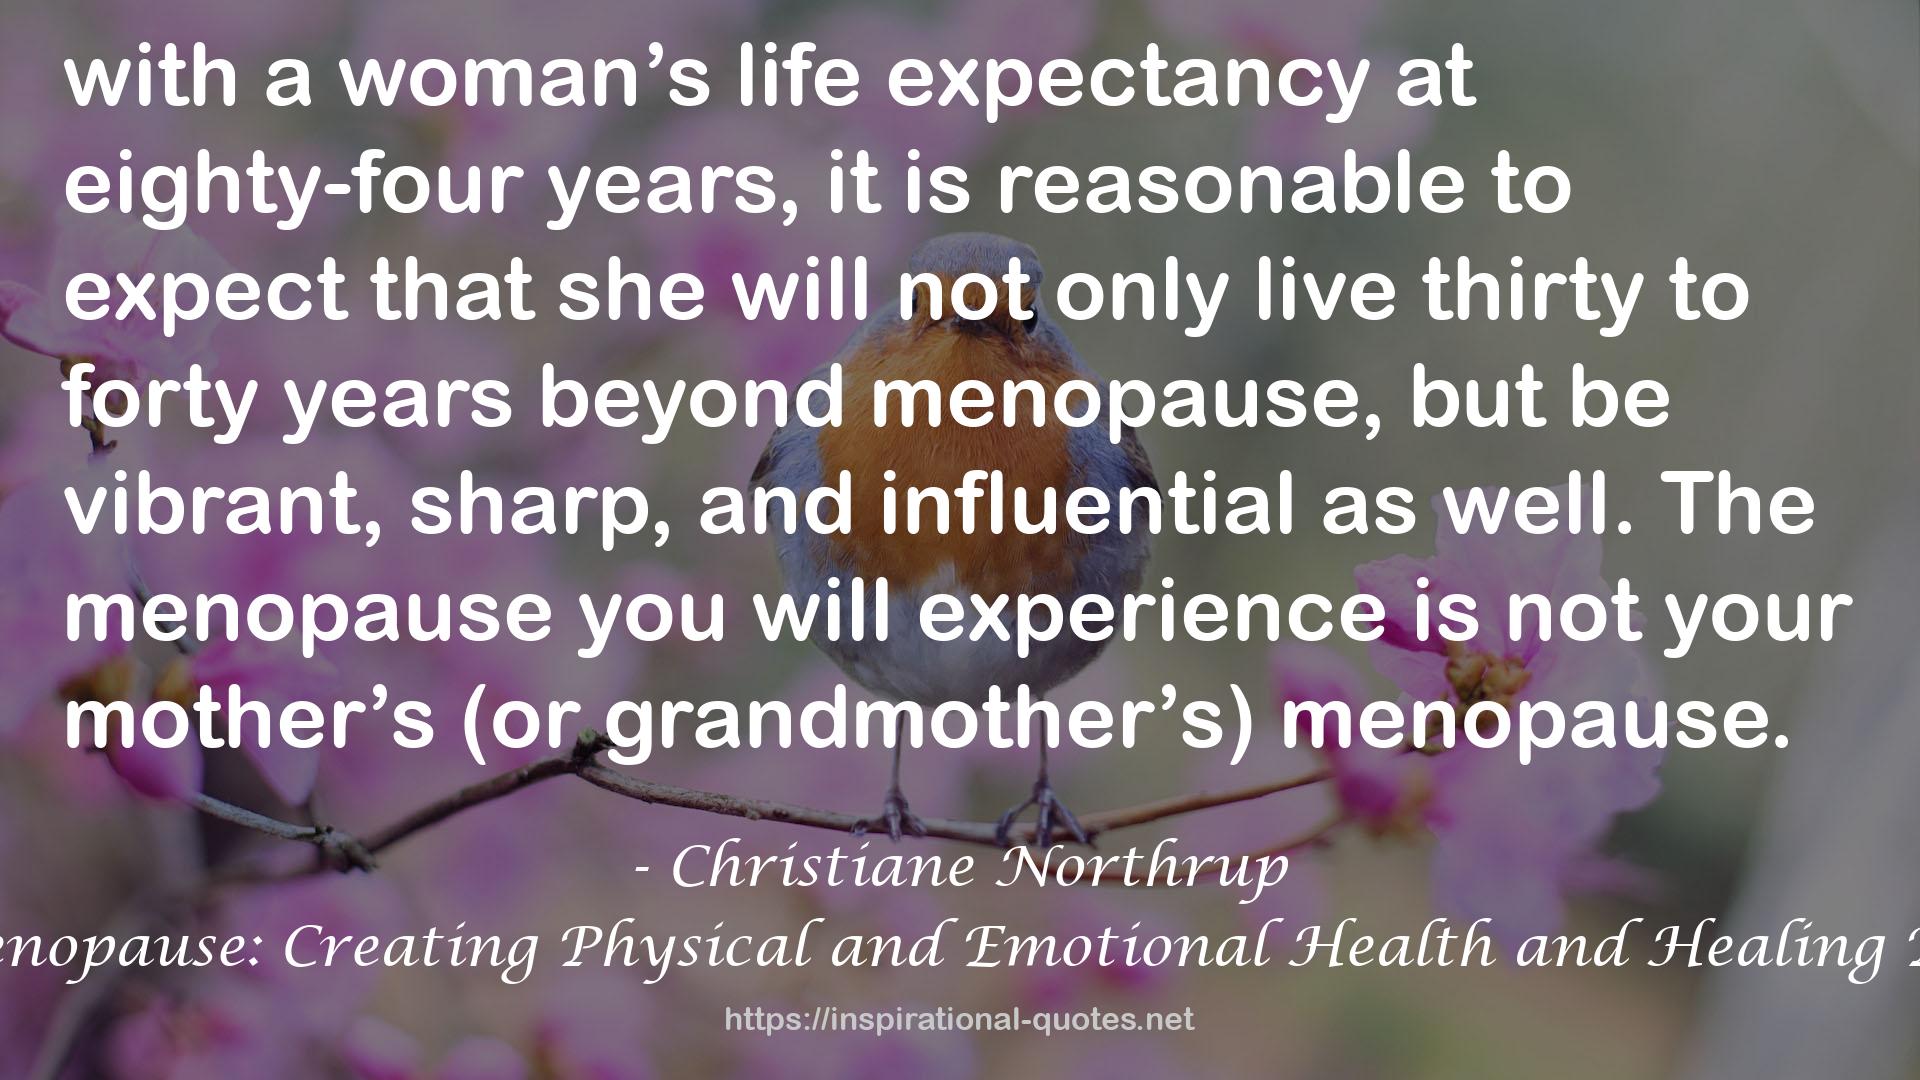 The Wisdom of Menopause: Creating Physical and Emotional Health and Healing During the Change QUOTES